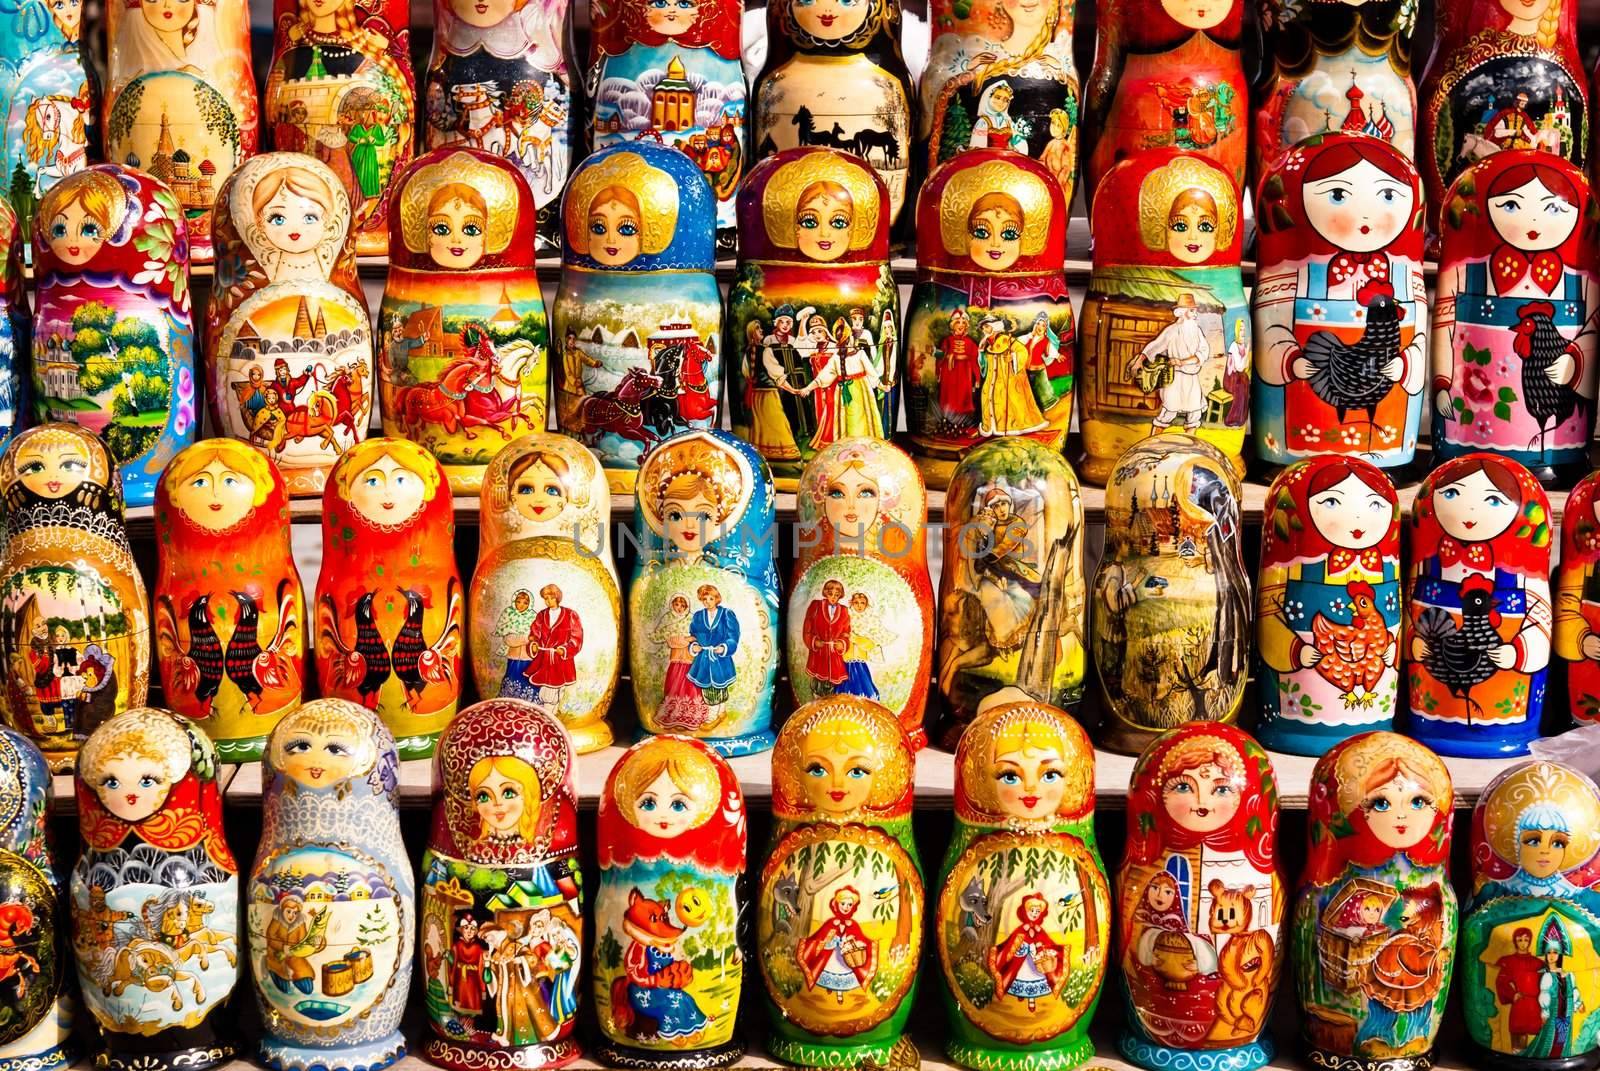 Colorful Russian dolls on display
